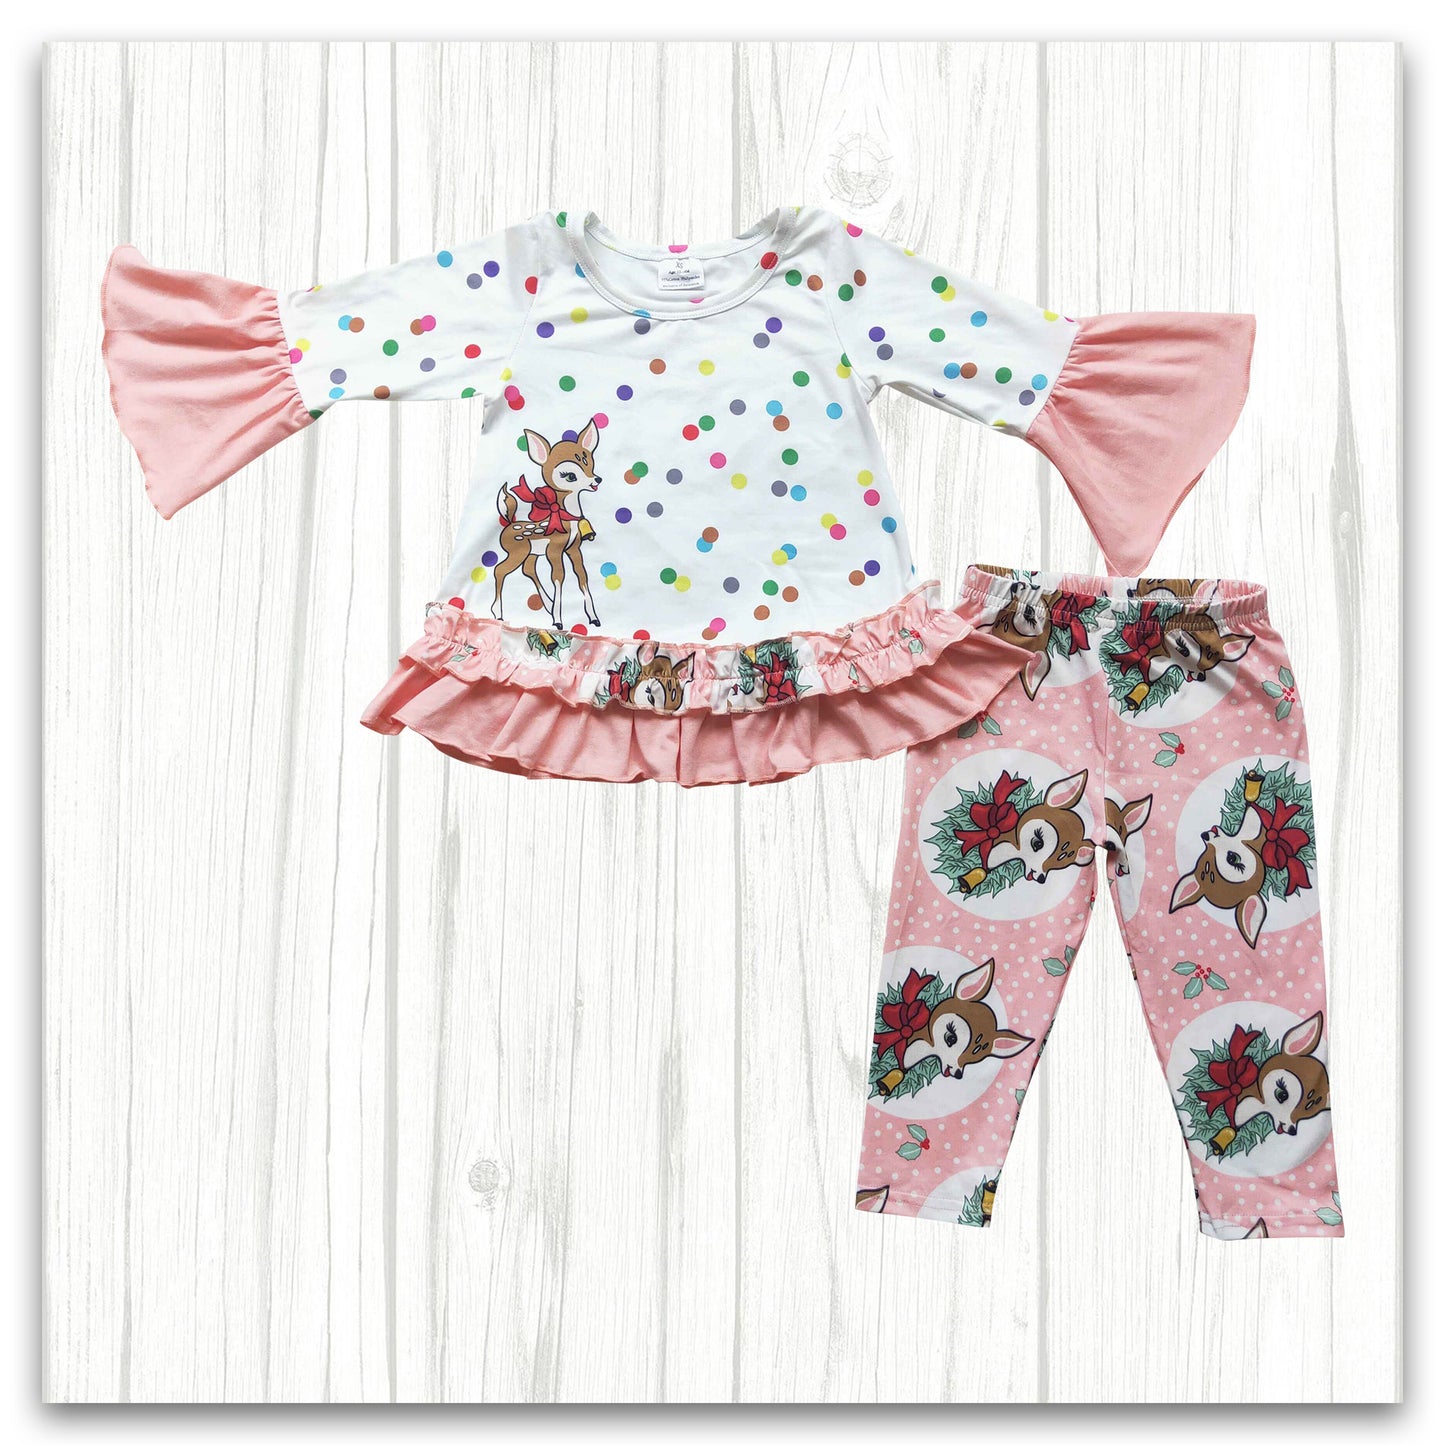 Pretty Ruffle Deer Outfit for Christmas